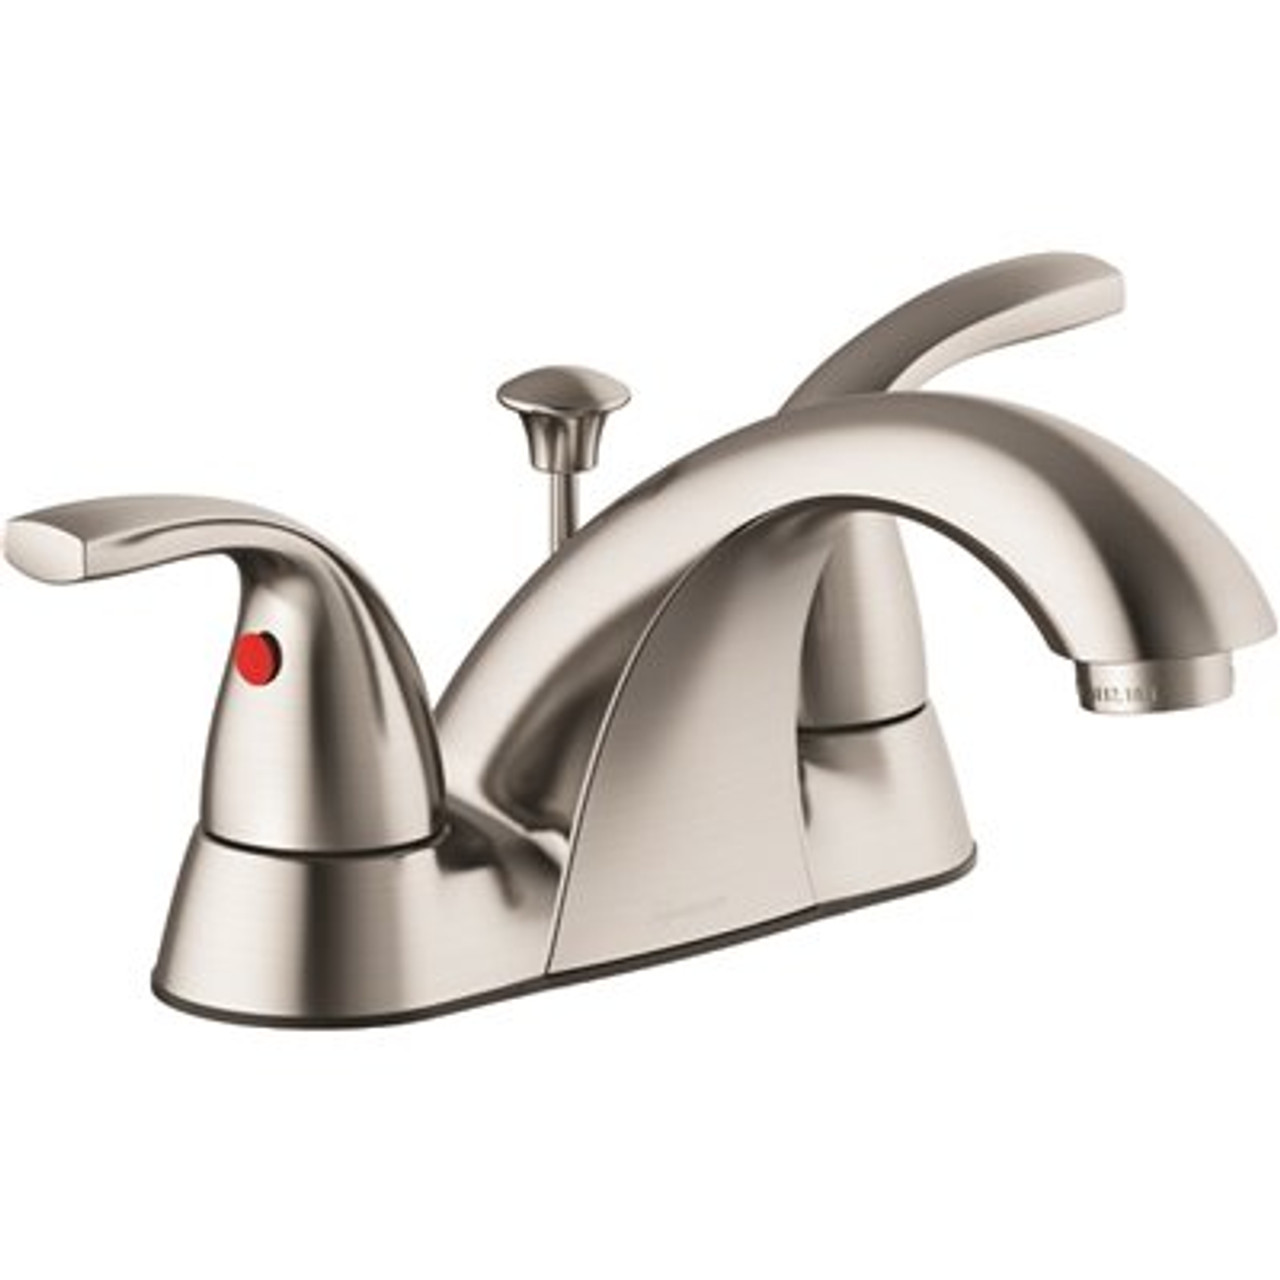 Seasons Anchor Point 4 in. Centerset Double-Handle Bathroom Faucet in Brushed Nickel with Metal Quick Install Pop Up